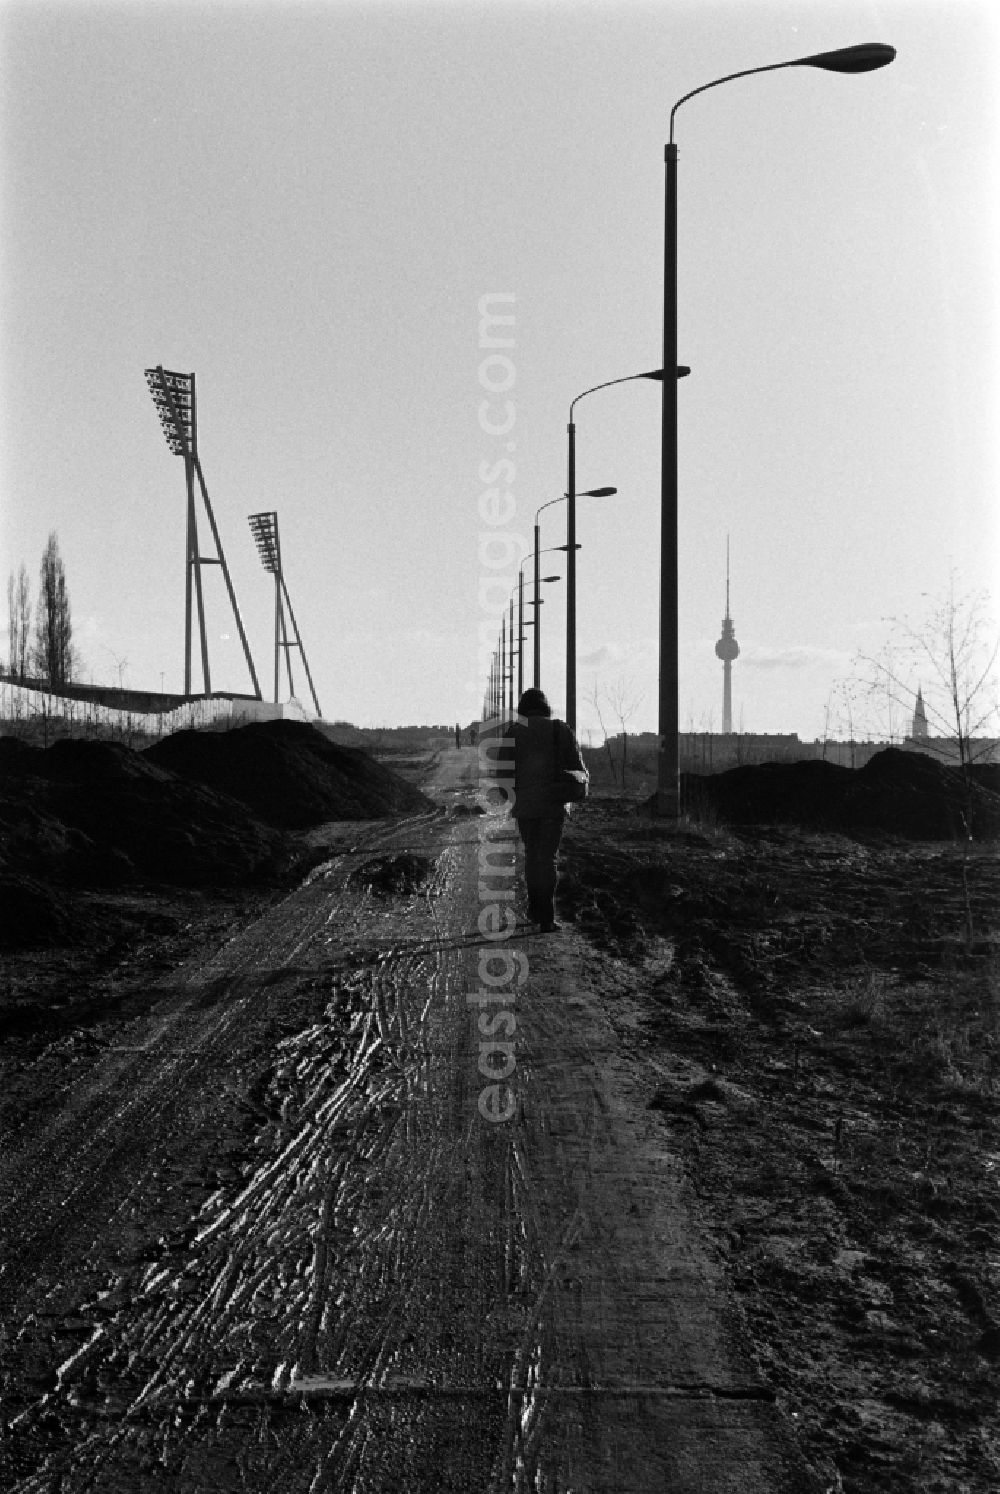 GDR image archive: Berlin - Former course of the Berlin Wall at the Friedrich-Ludwig-Jahn-Sportpark (also Jahnsportpark, Jahn-Sportpark, Jahnstadion or Cantianstadion) in Berlin - Prenzlauer Berg, the former capital of the GDR, German Democratic Republic